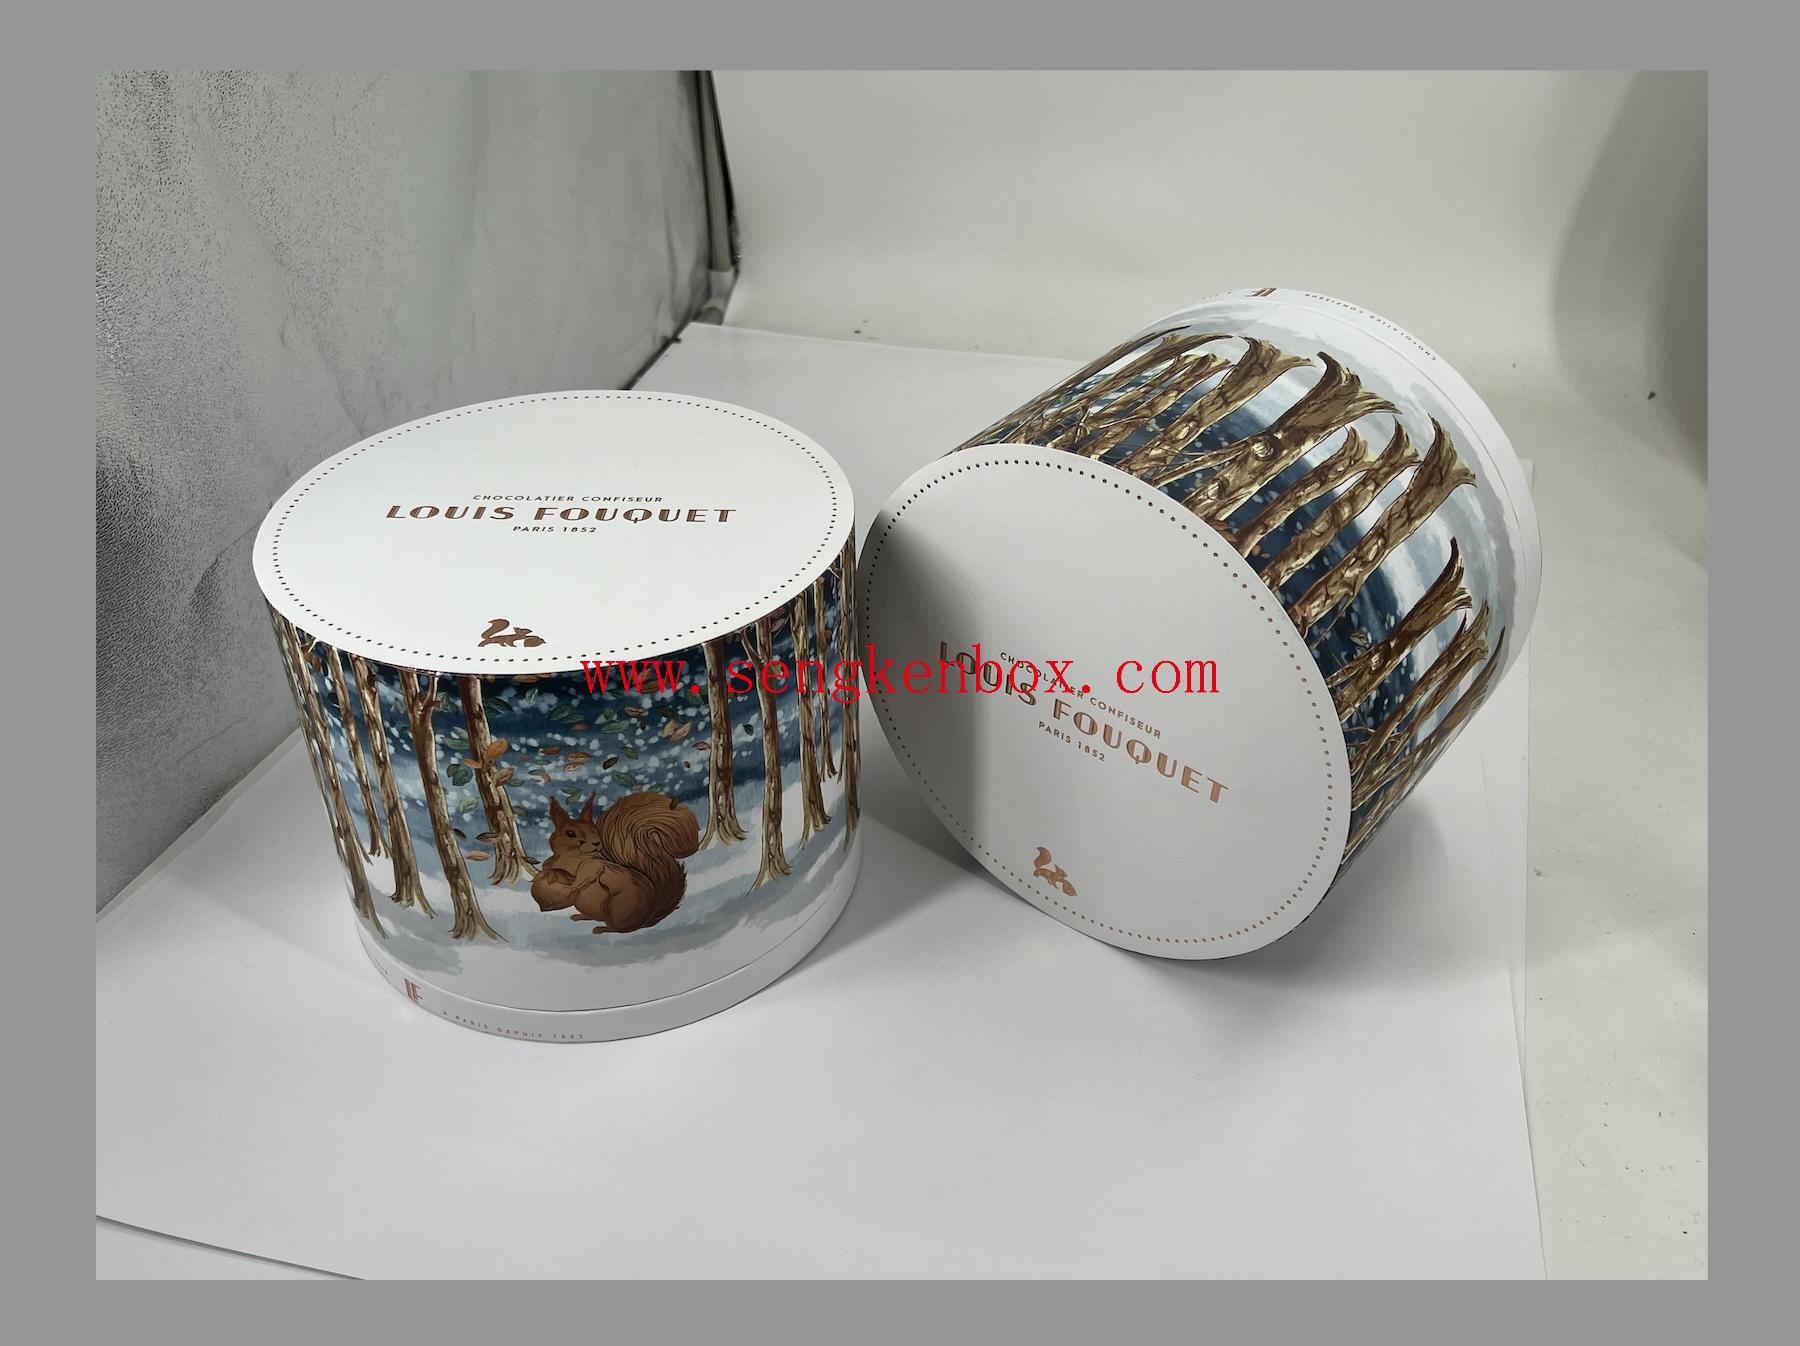 2 Pieces Round Chocolate Packaging Gift Box with Paper Insert